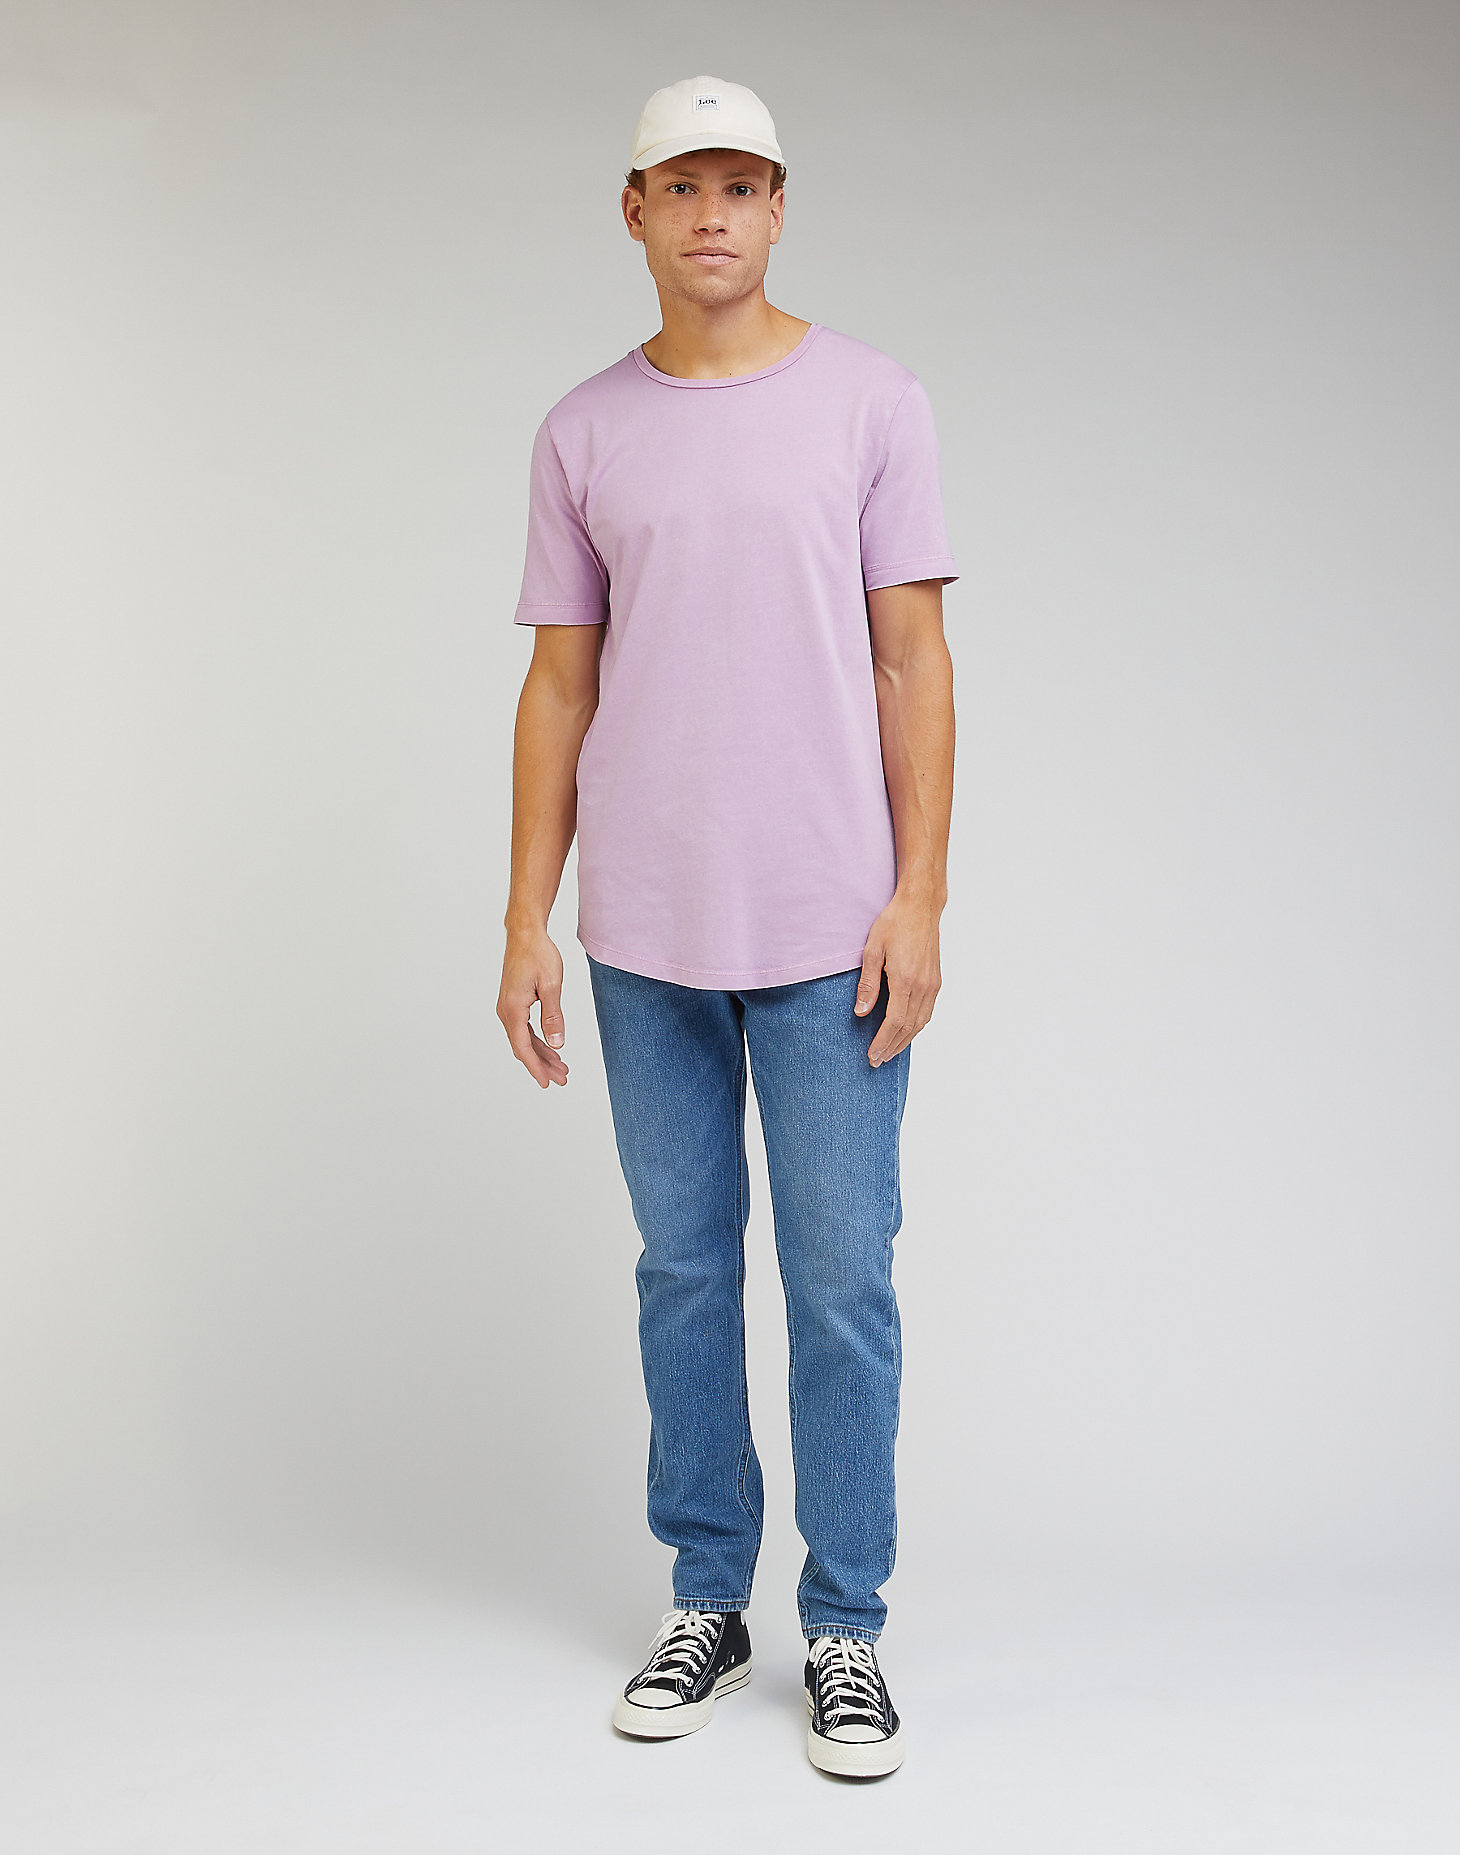 Shaped Tee in Pansy alternative view 2